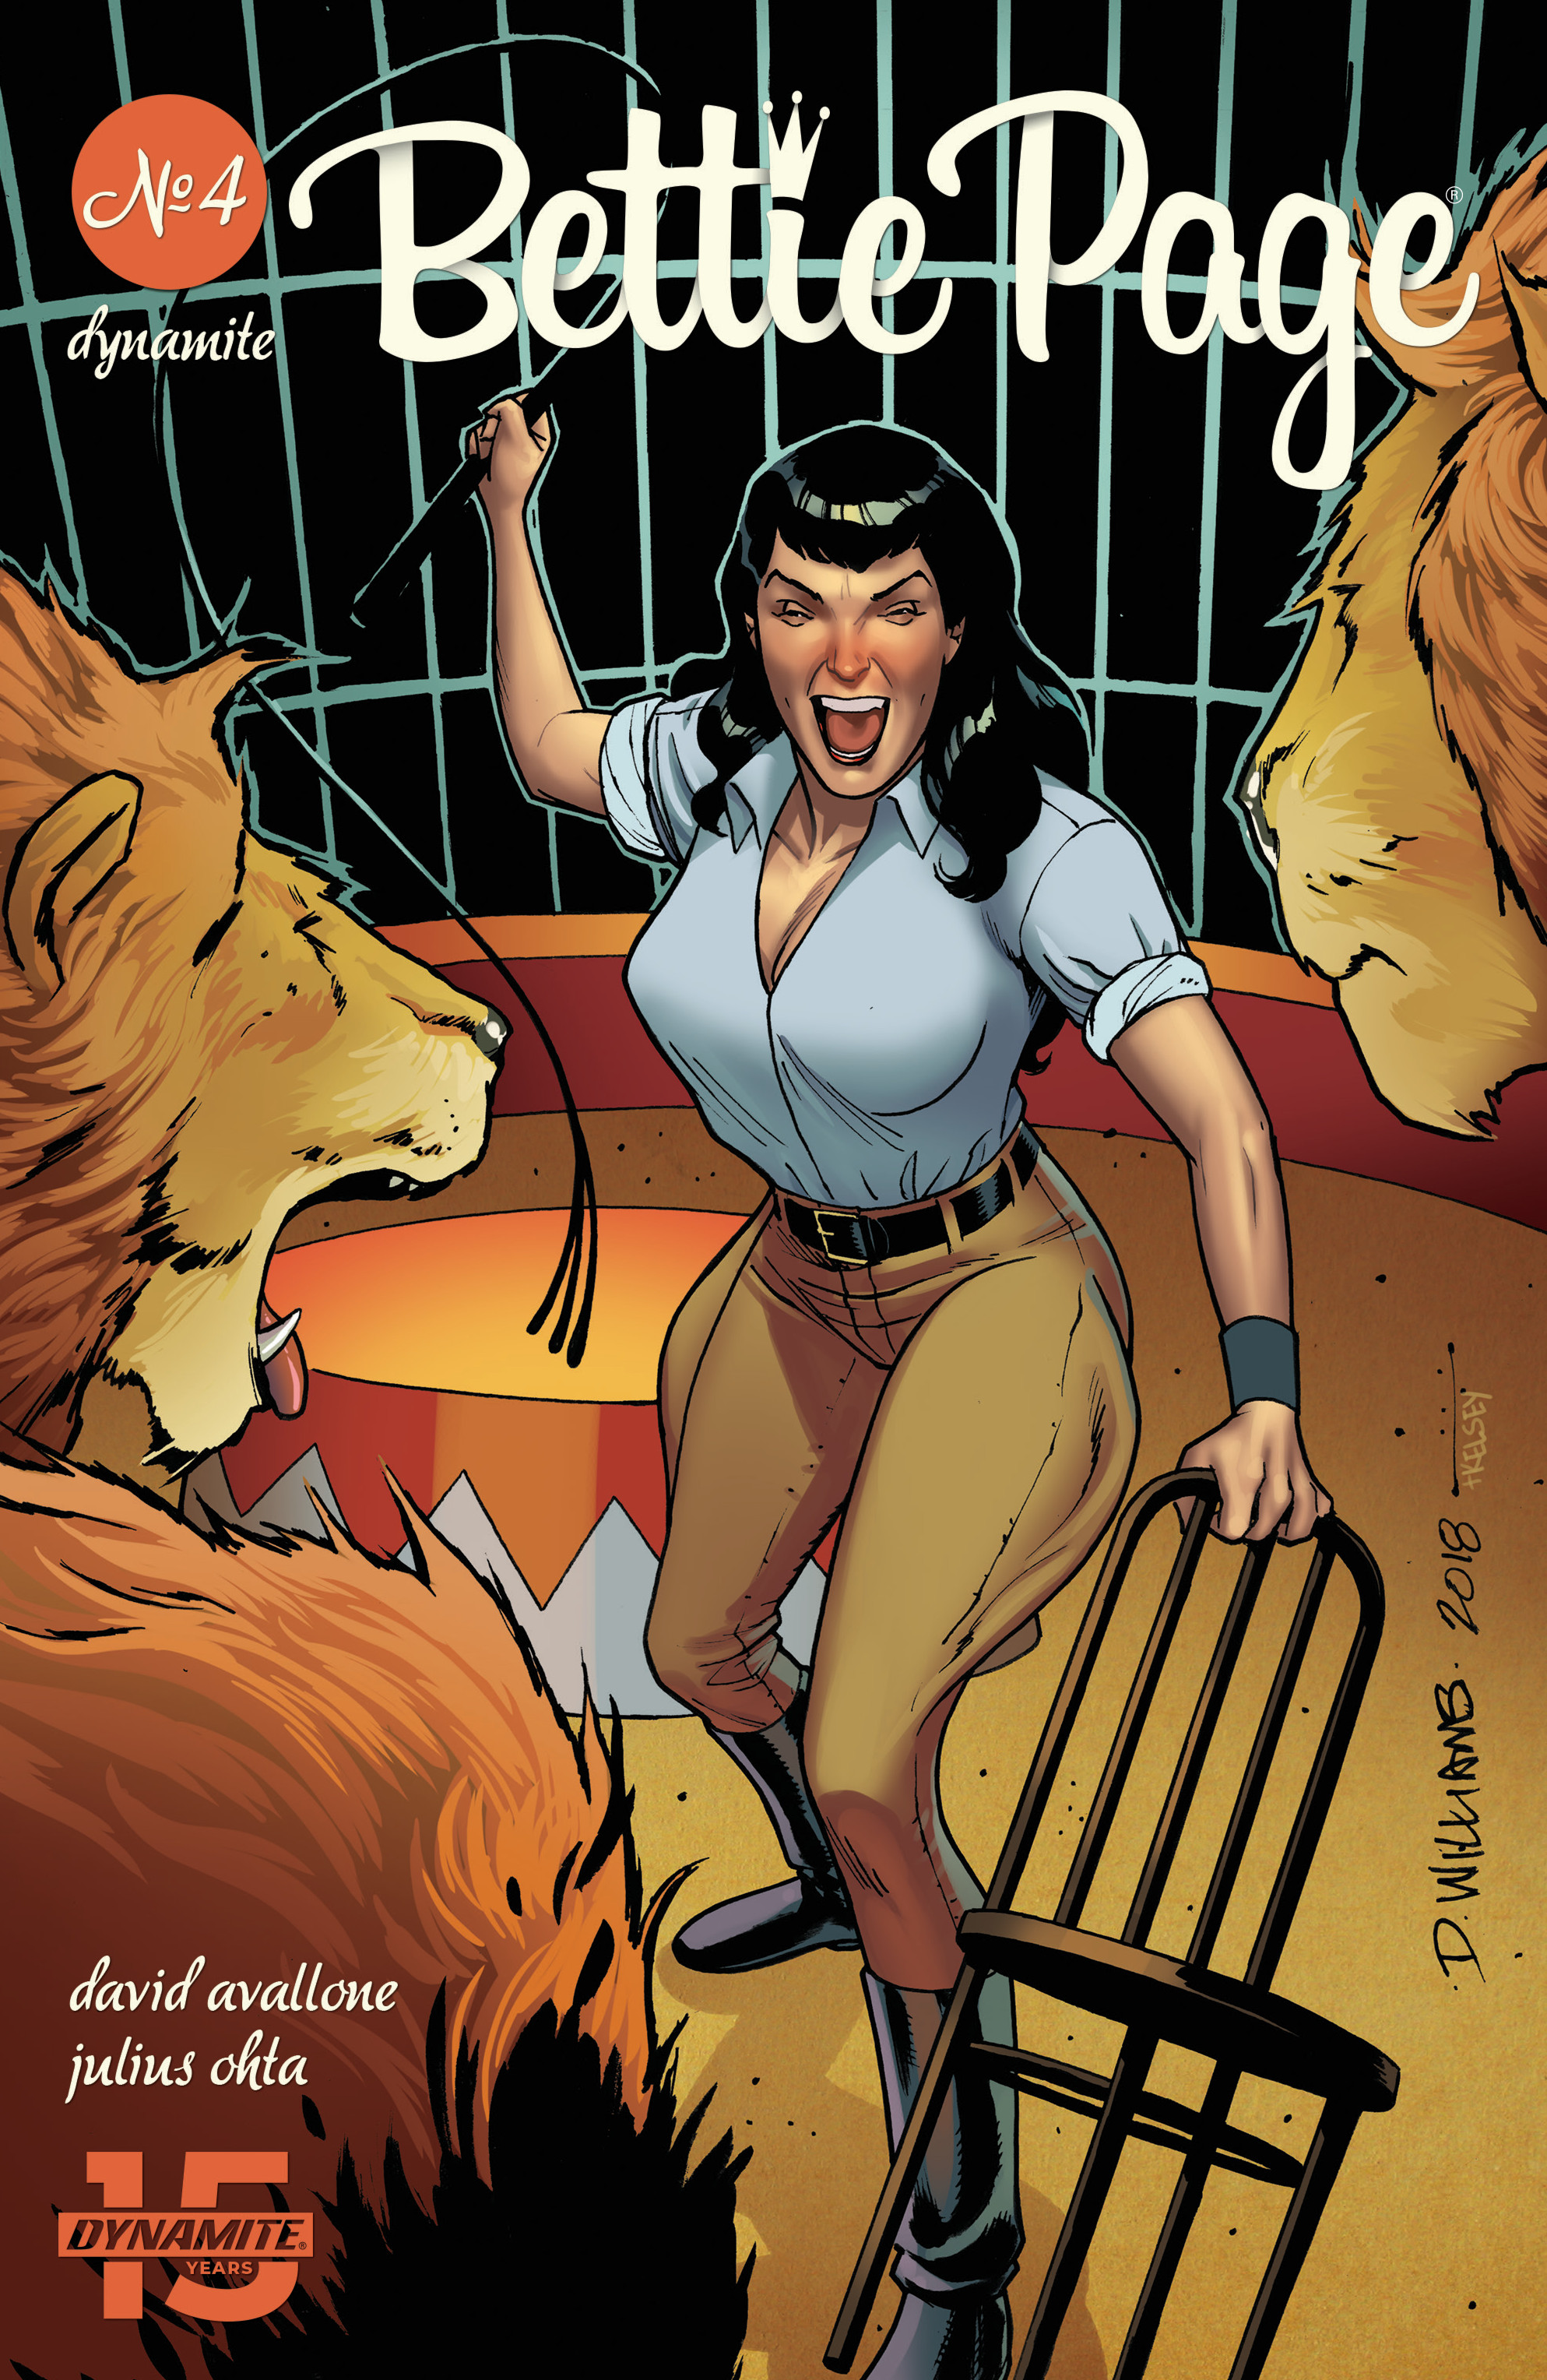 Read online Bettie Page (2018) comic -  Issue #4 - 3